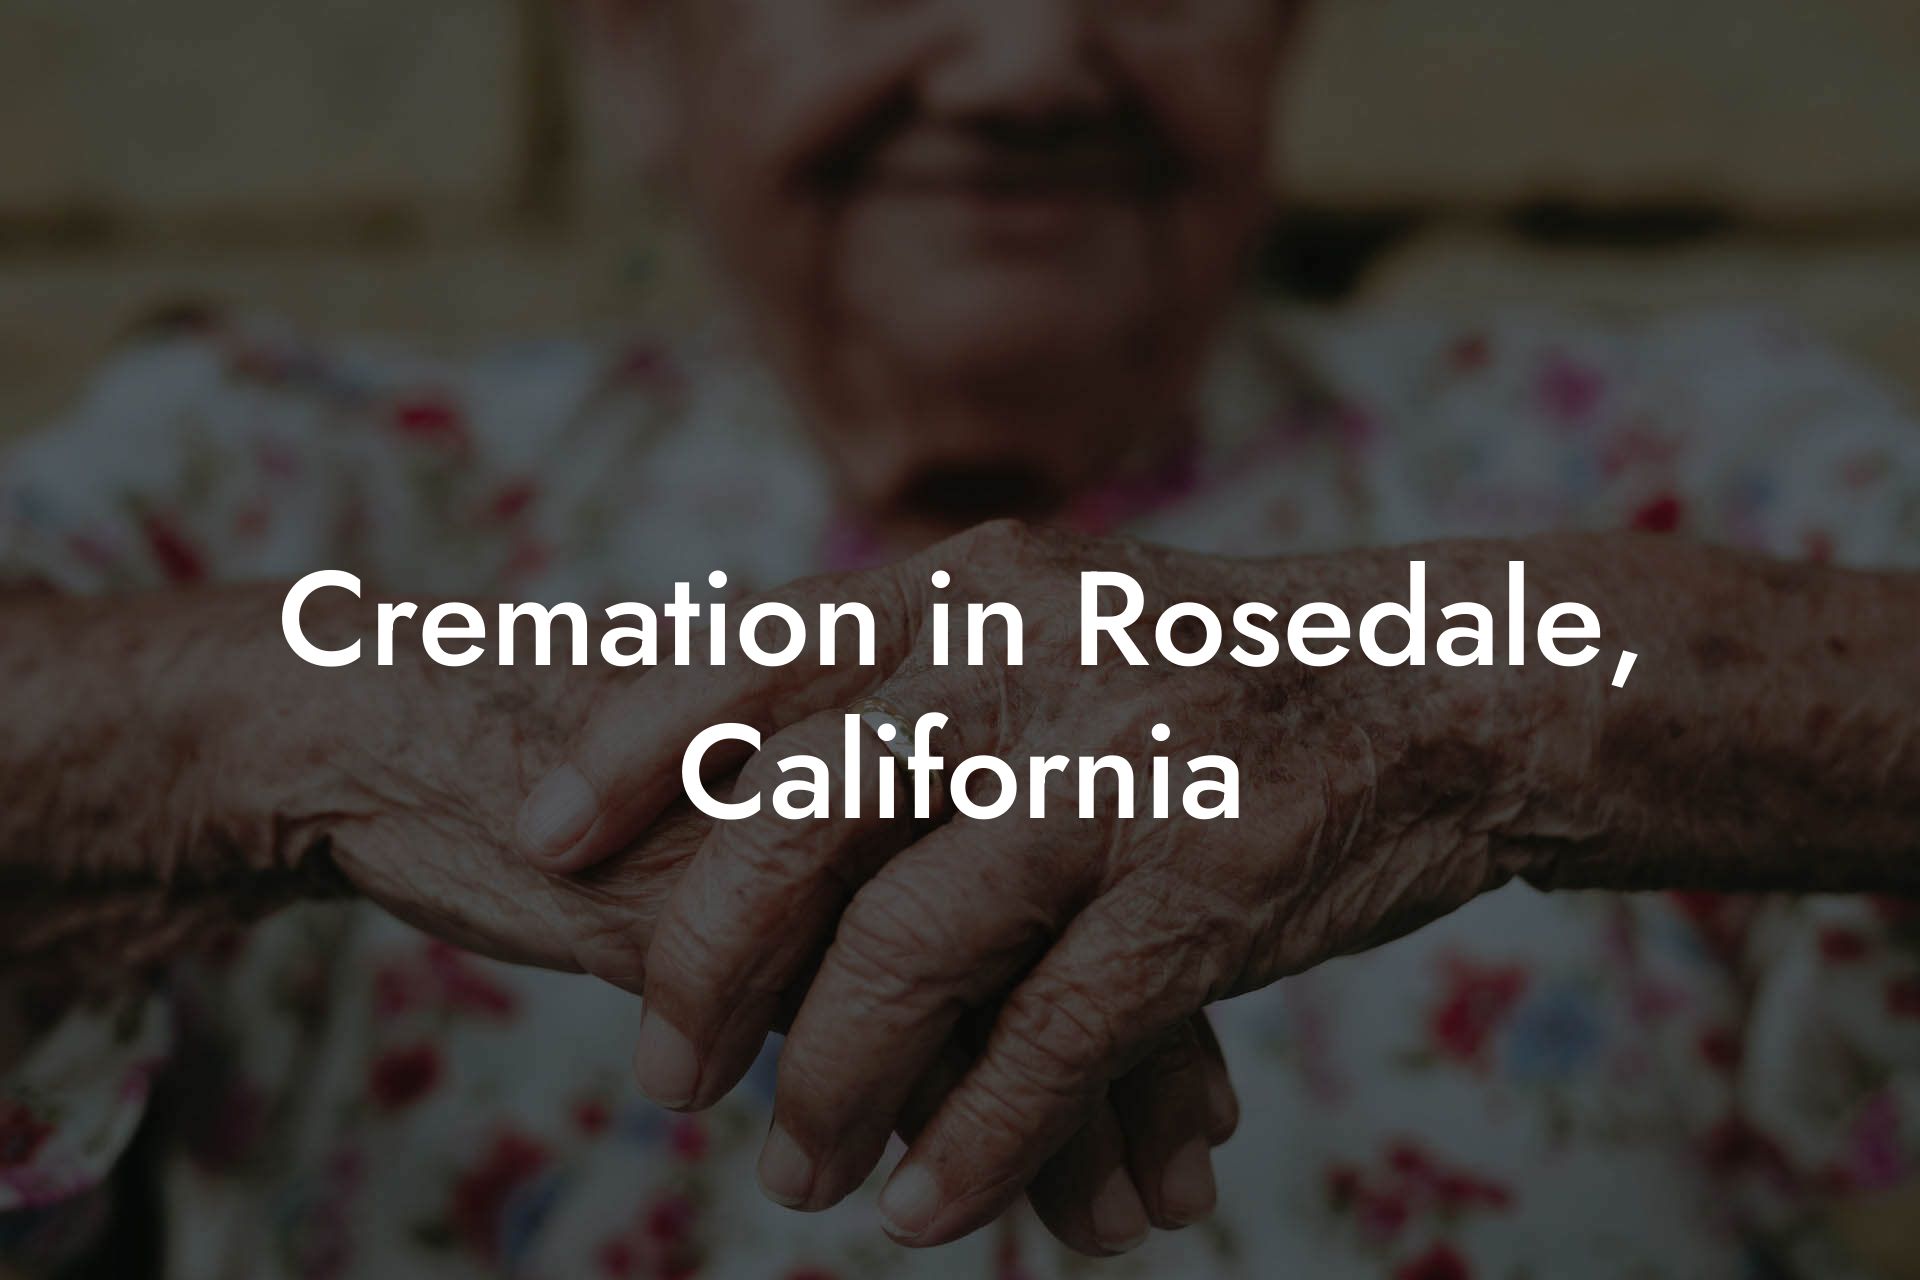 Cremation in Rosedale, California